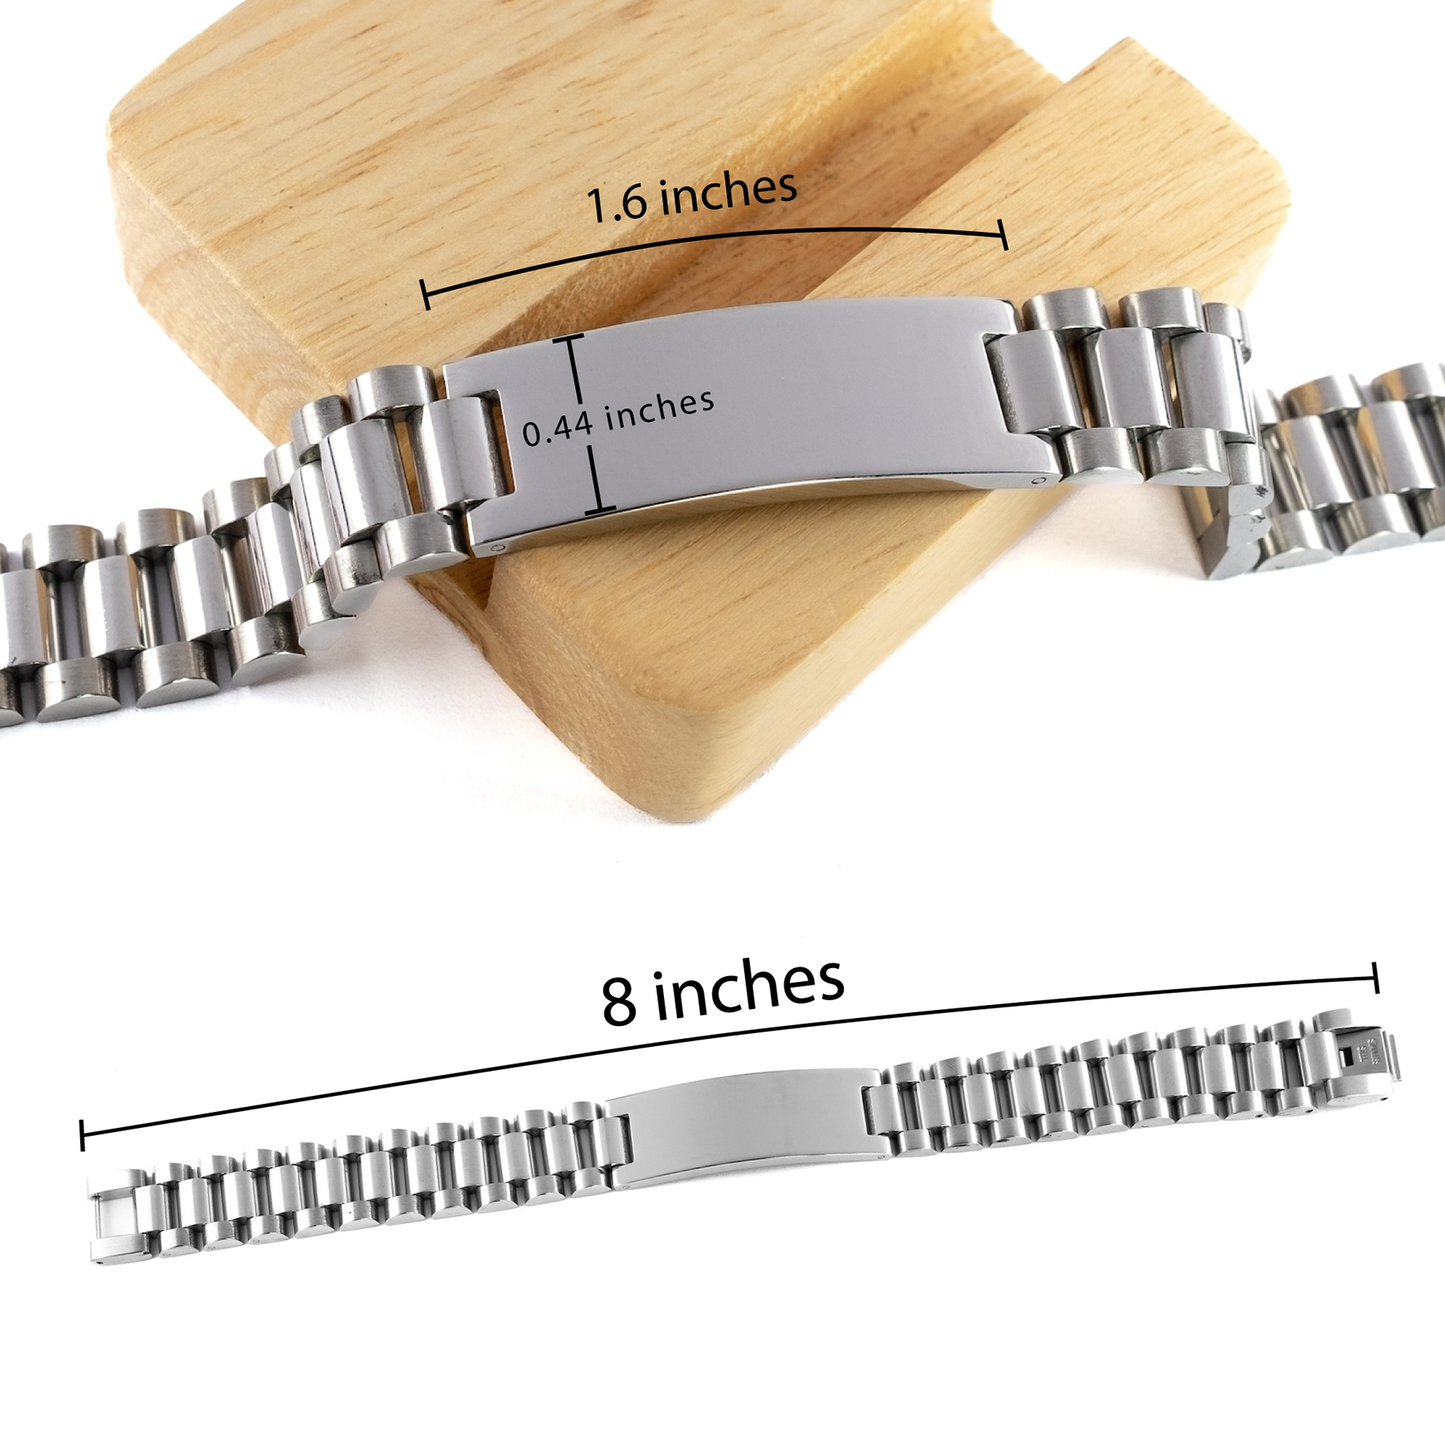 Grandson Motivational Gifts from Grandpa, Remember to never give up no matter what, Inspirational Birthday Ladder Stainless Steel Bracelet for Grandson